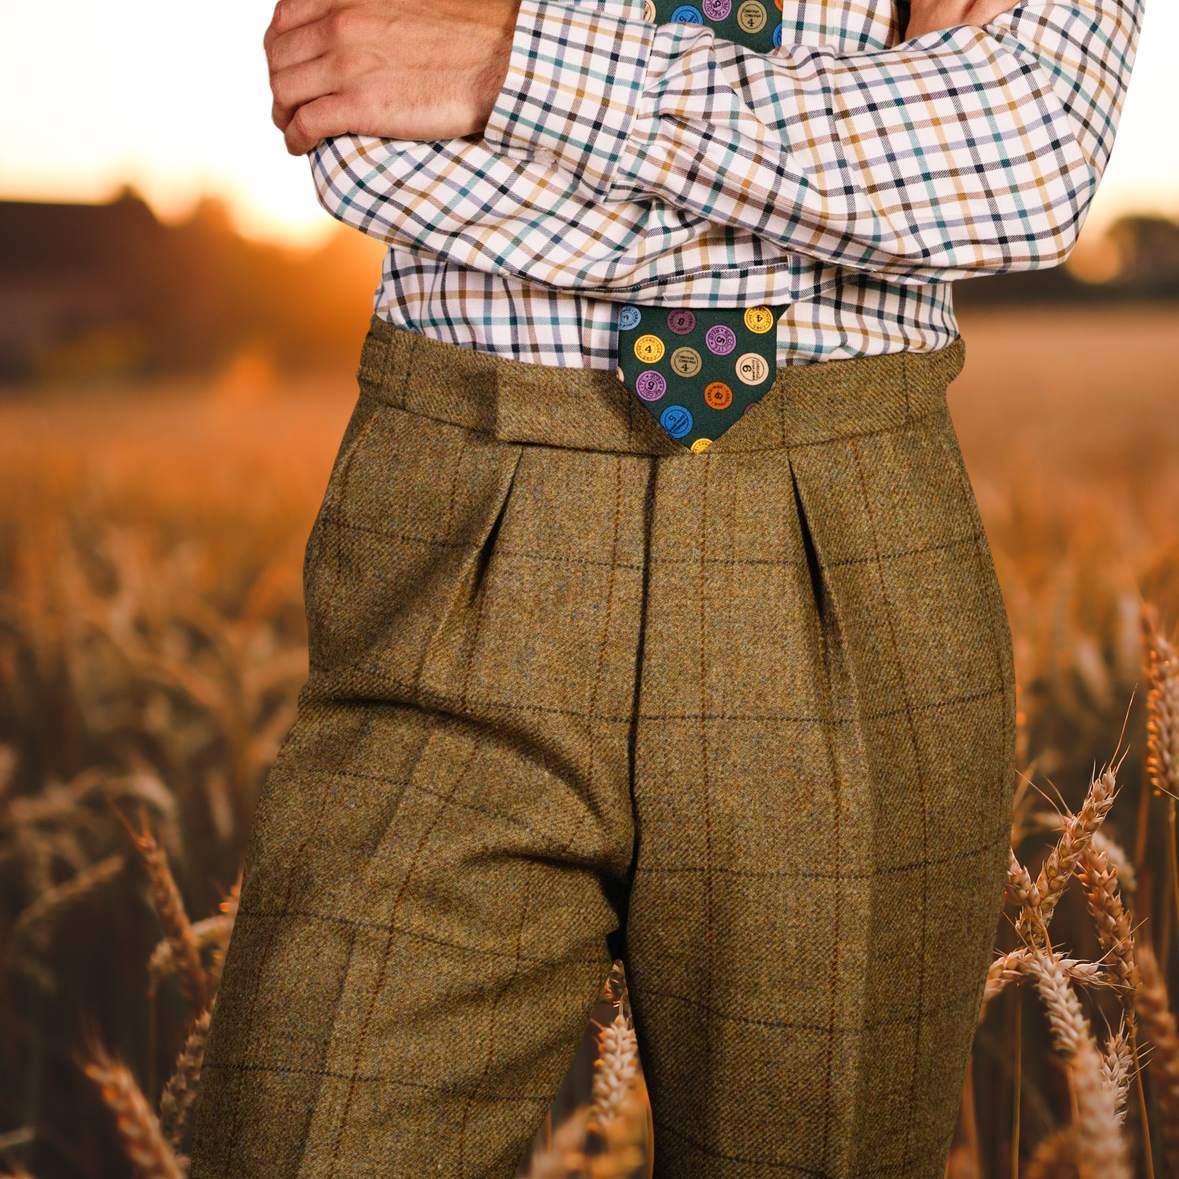 Men's Country Style Trousers | British Tweed & Cotton Jeans US